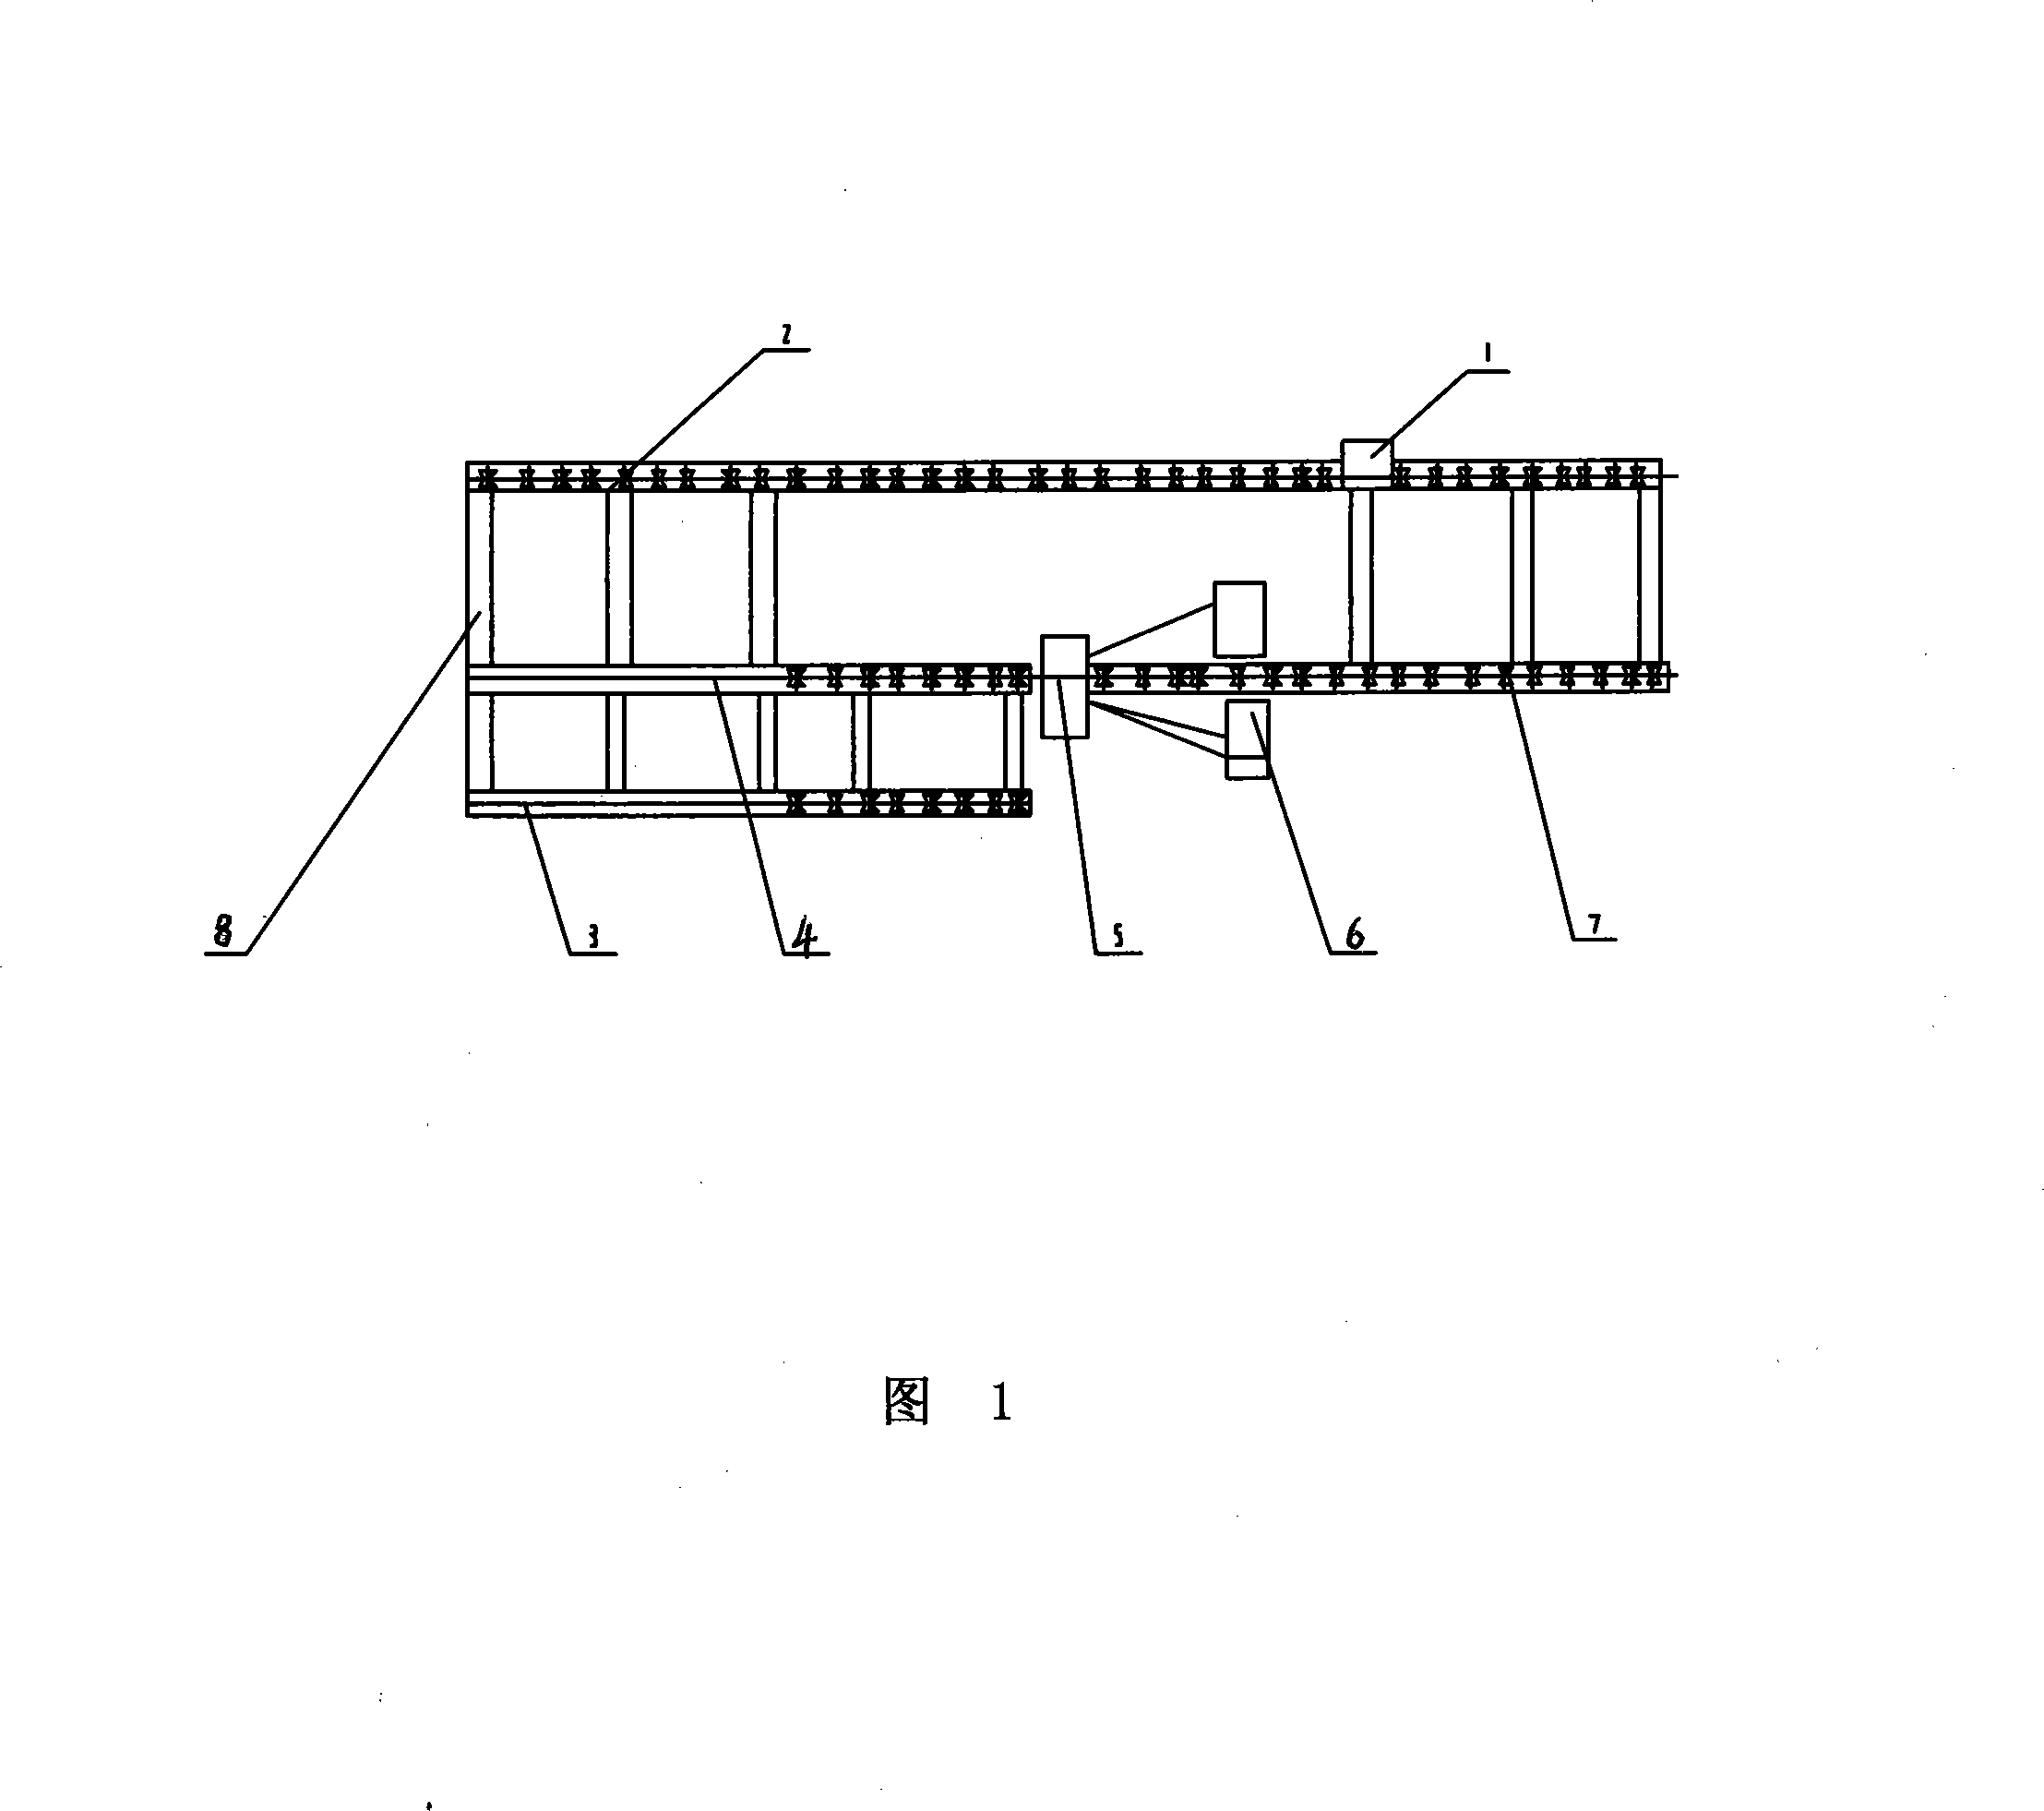 Three-roller tube-rolling machine with two threading-bar mode